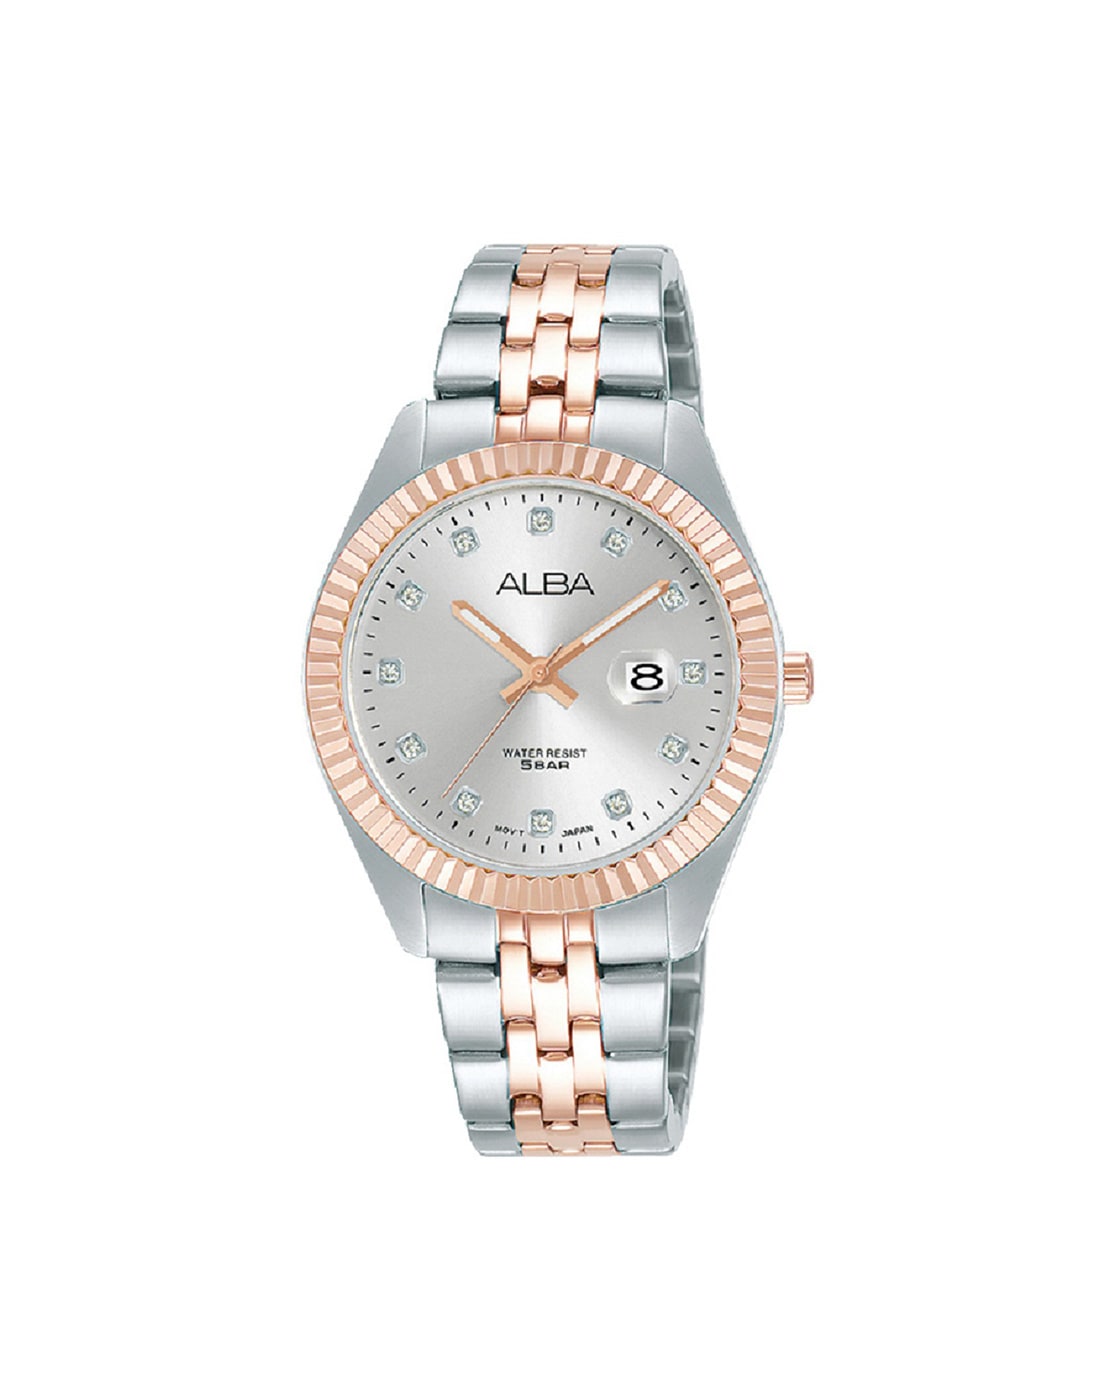 Round Alba Mechanical AL4211X1 Men Wrist Watch, For Personal Use at Rs 9500  in New Delhi